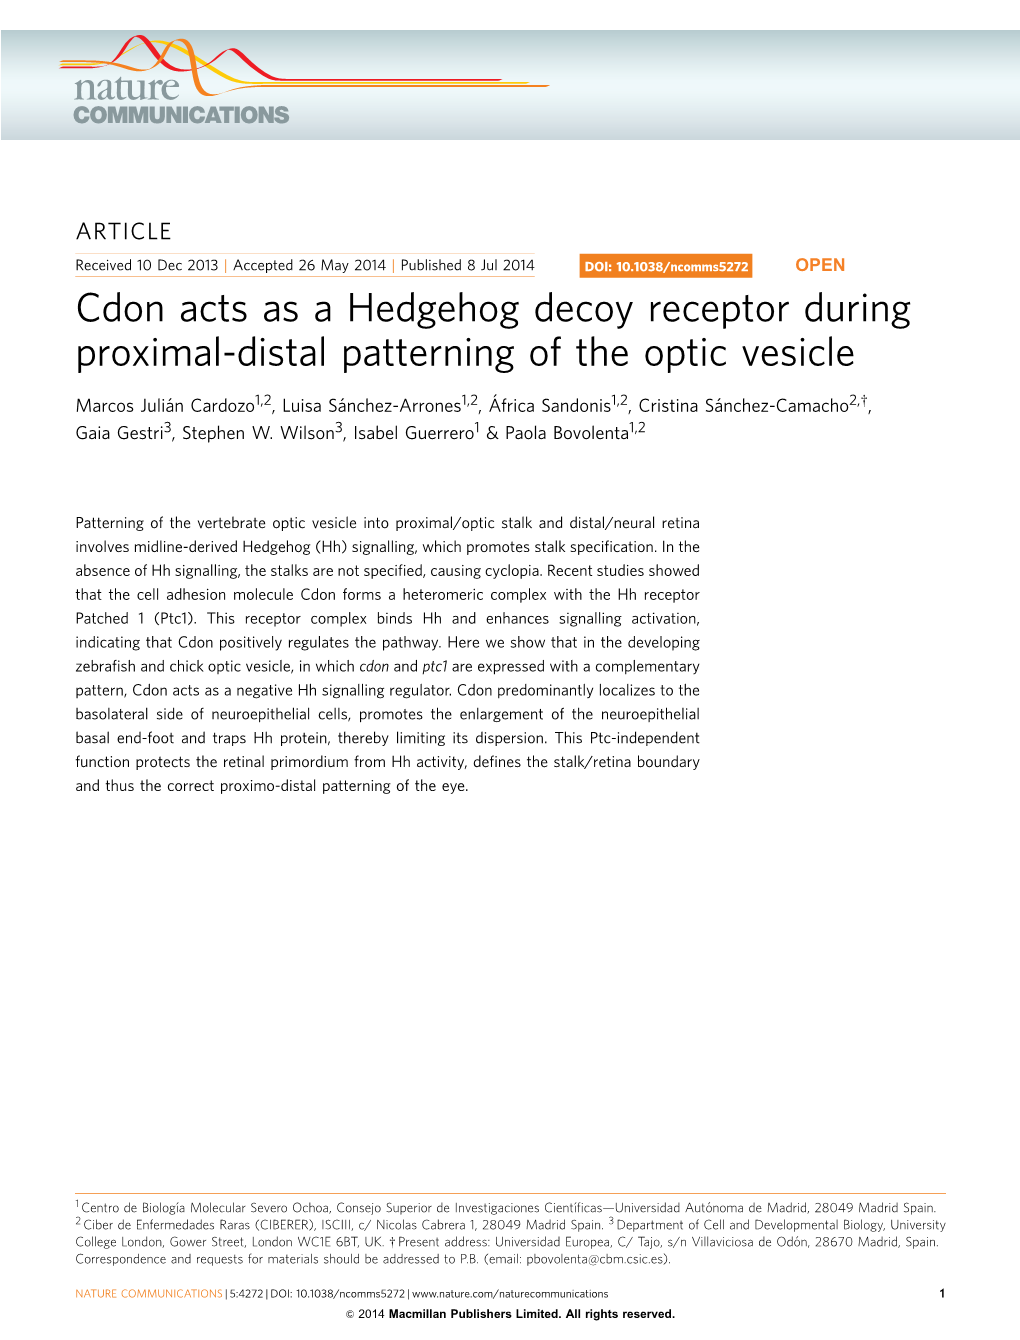 Cdon Acts As a Hedgehog Decoy Receptor During Proximal-Distal Patterning of the Optic Vesicle